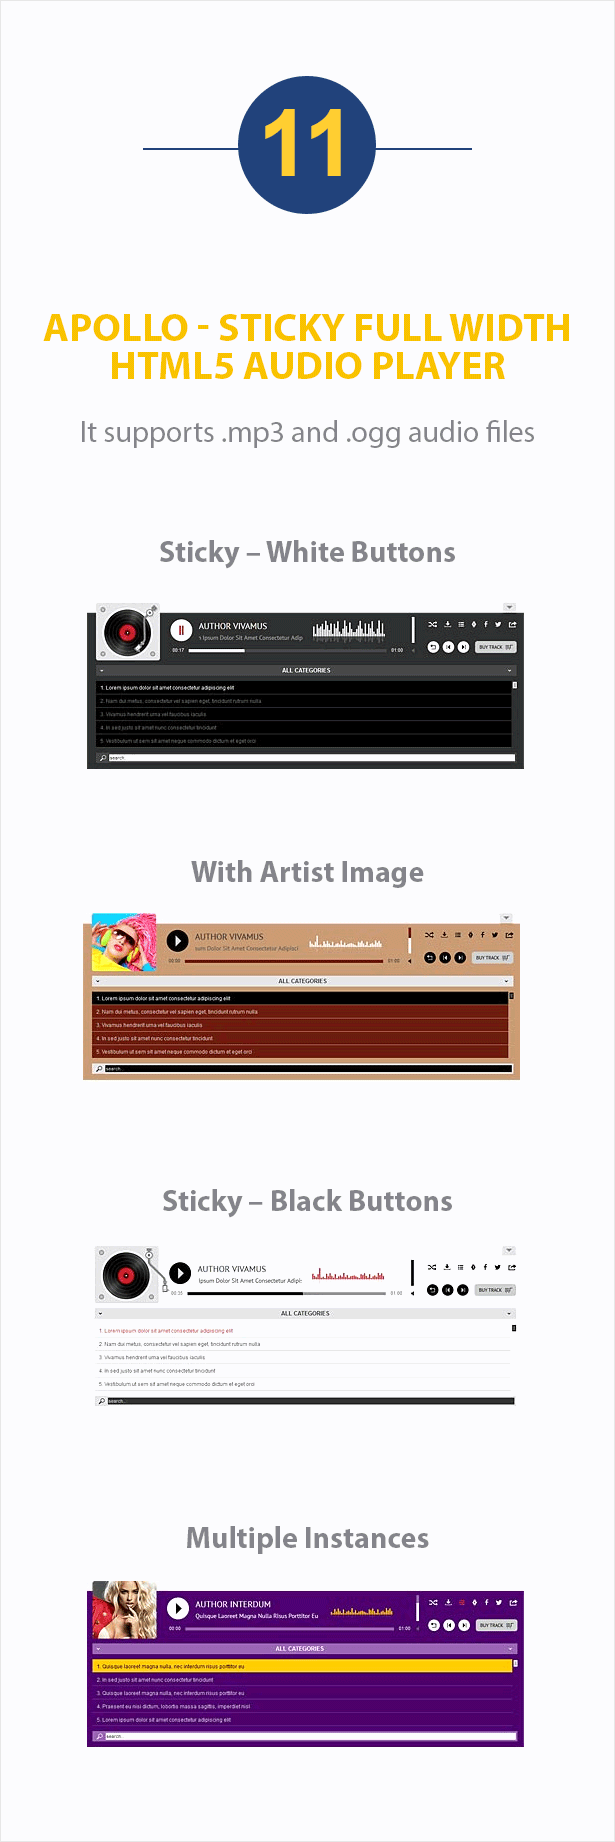 Apollo - Sticky Full Width HTML5 Audio Player for WPBakery Page Builder (formerly Visual Composer)